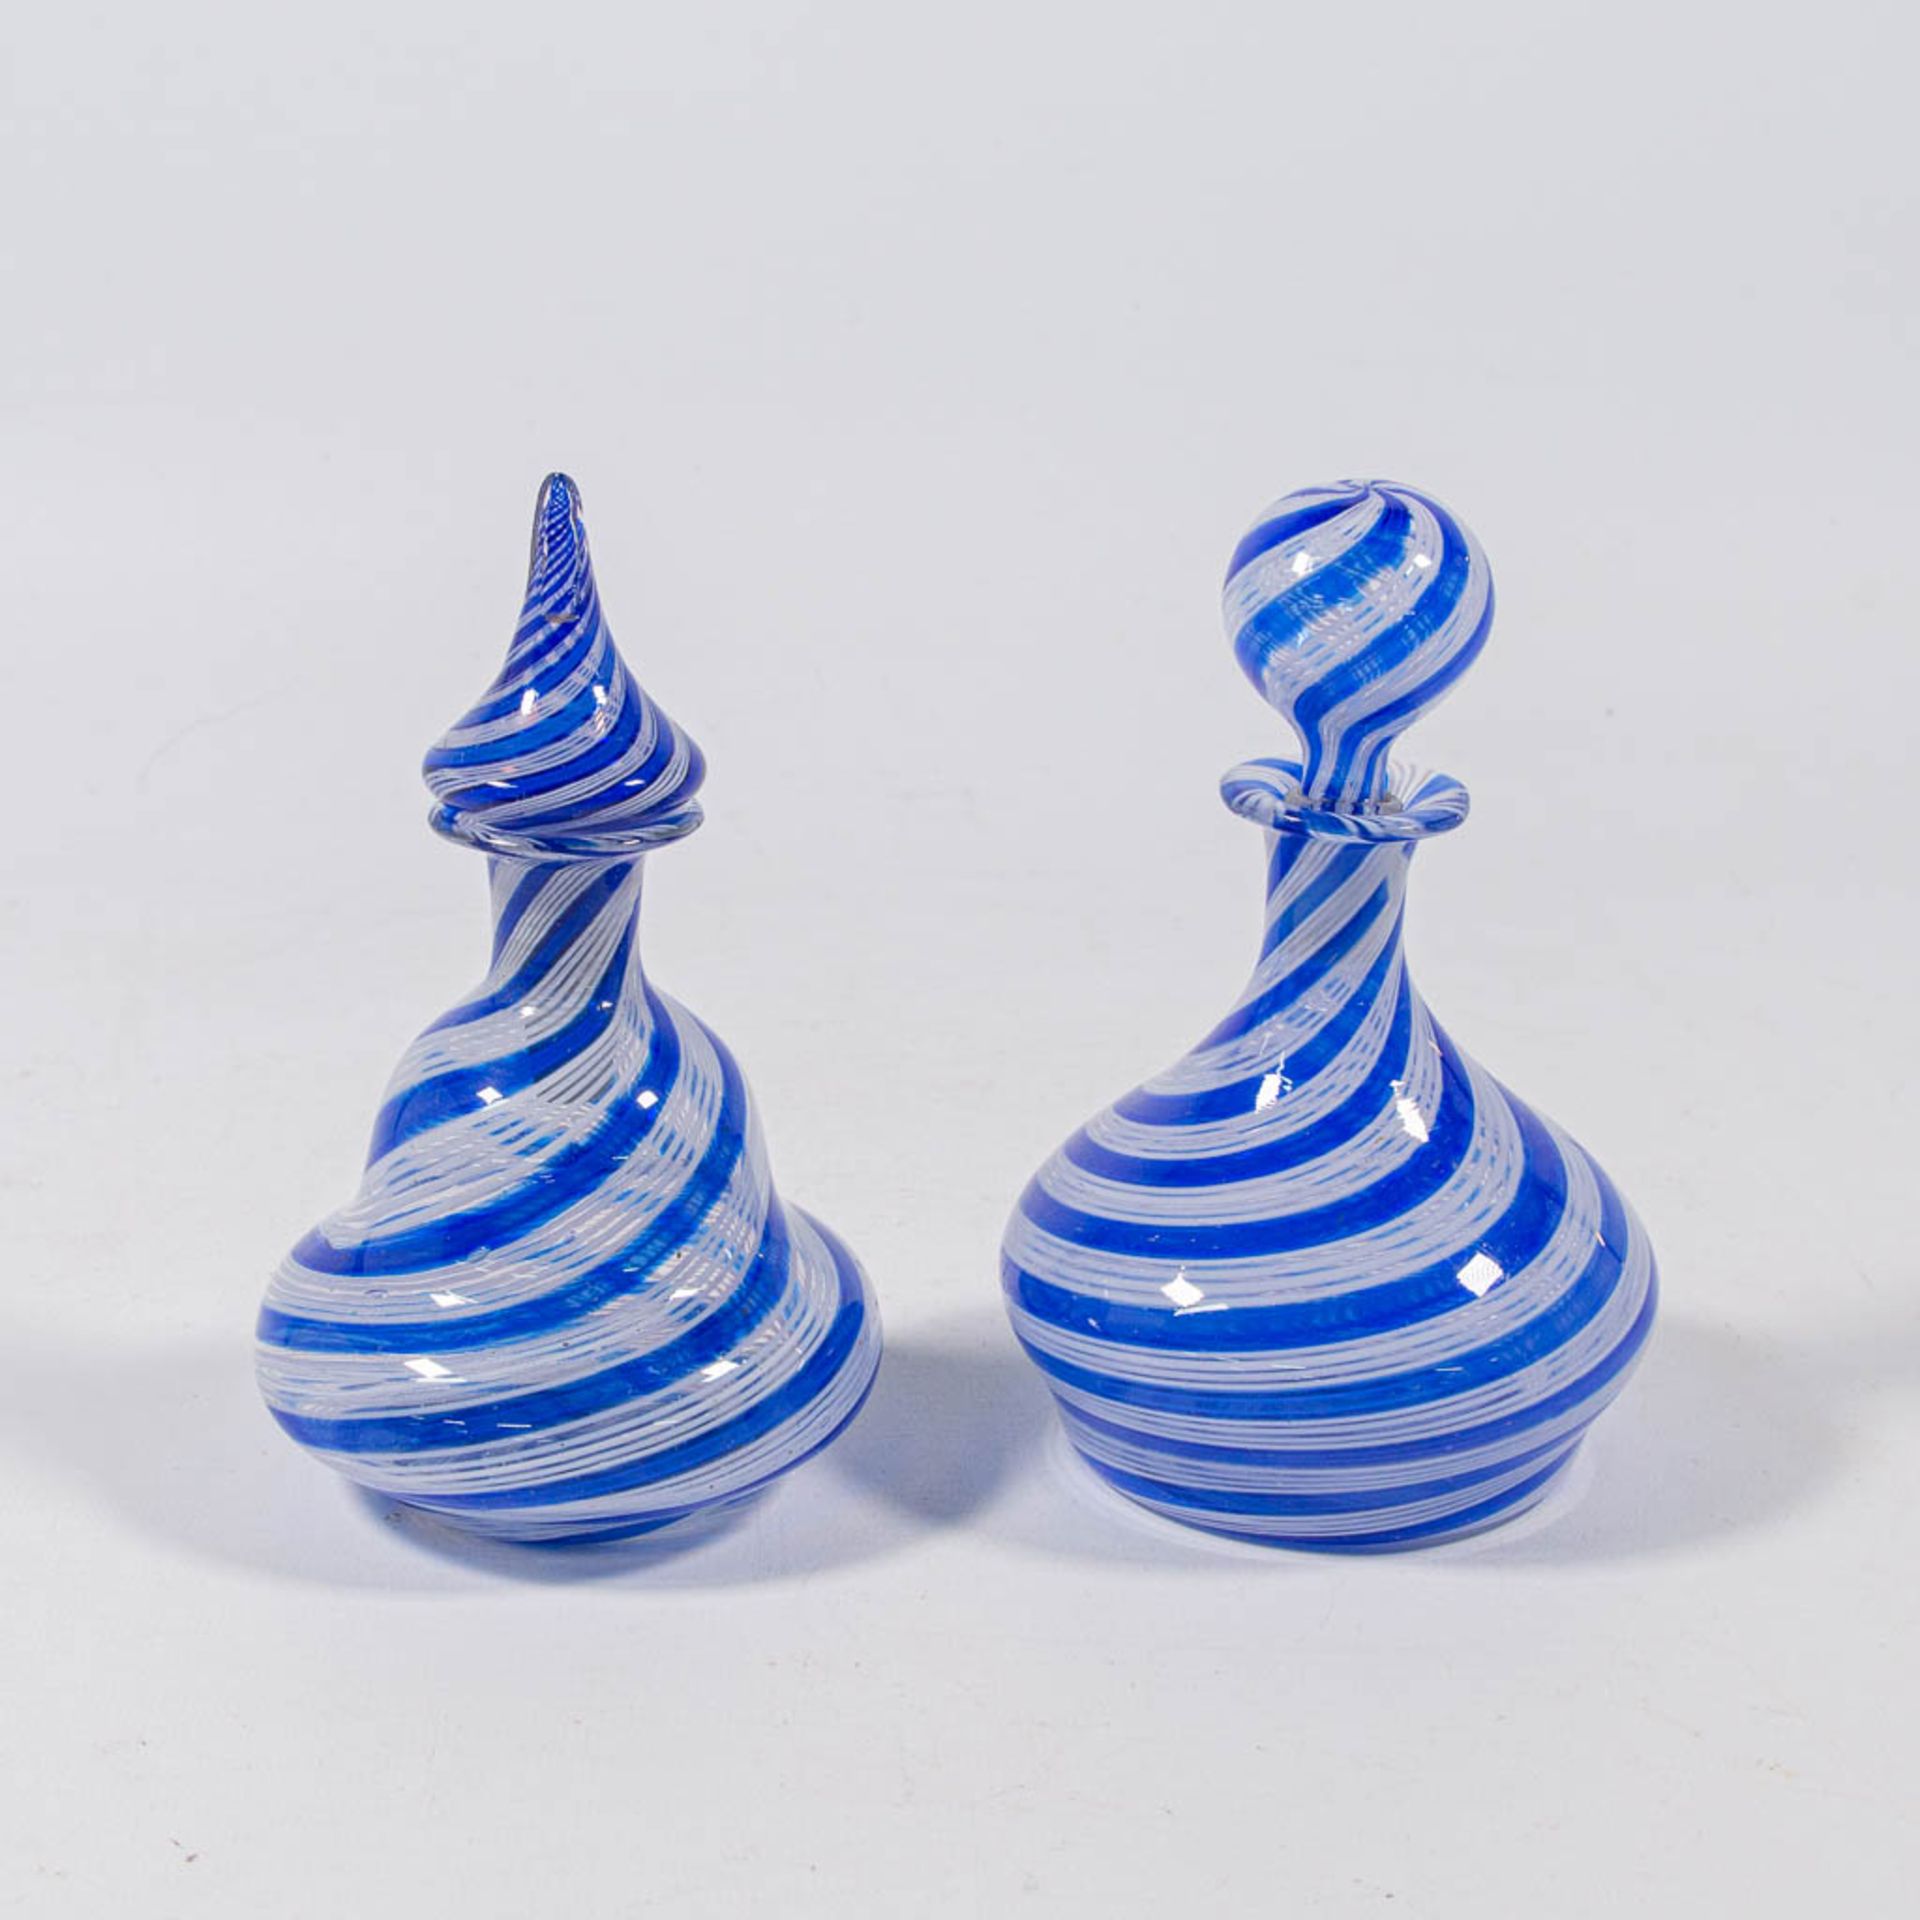 A pair of  decanters with stopper, made in Murano, Italy around 1950. (15 x 9 cm) - Bild 3 aus 17